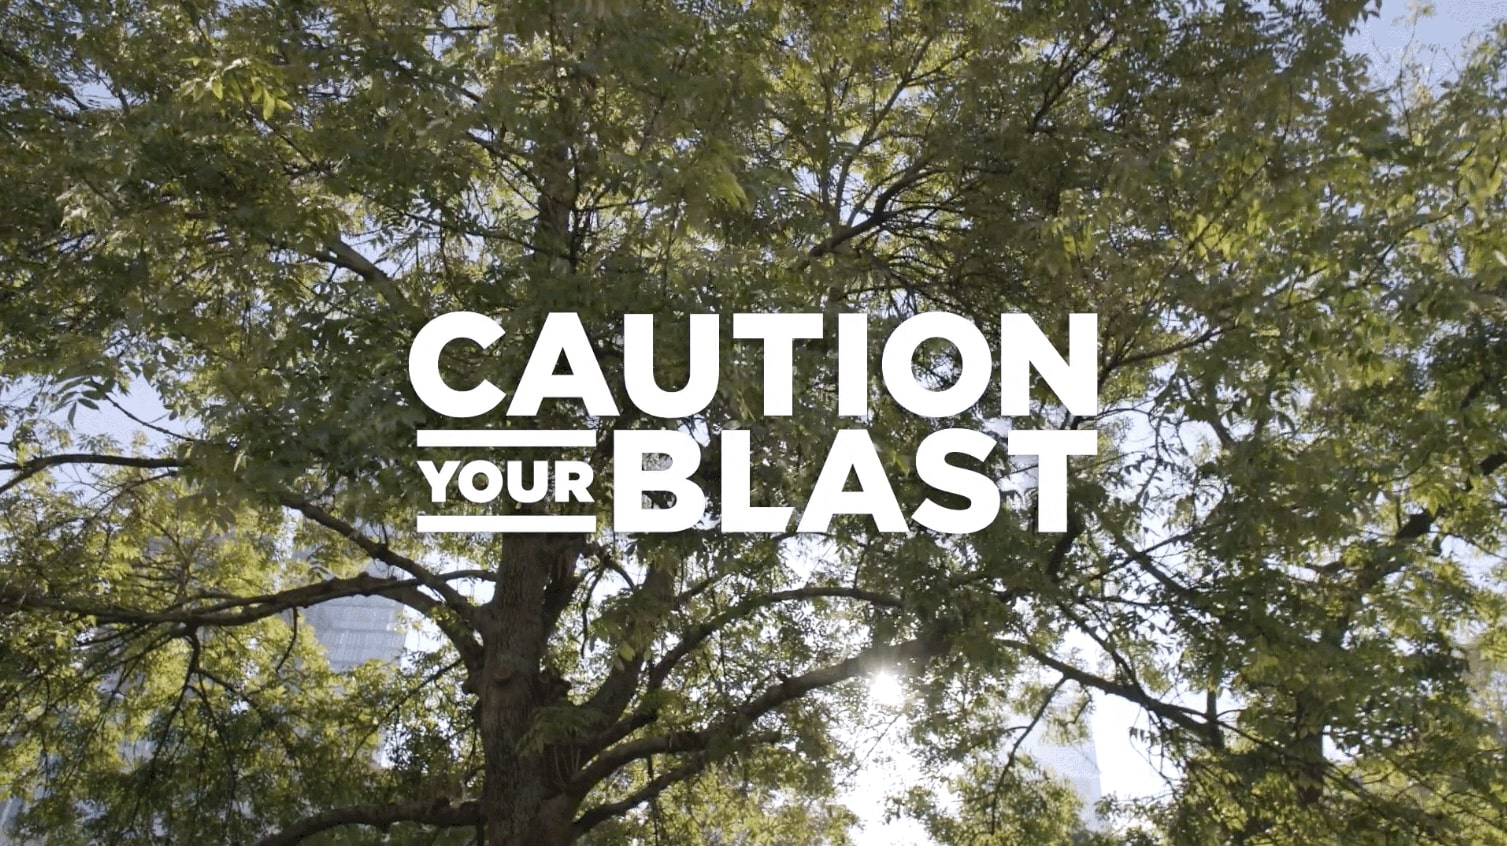 Video introducing who Caution Your Blast are